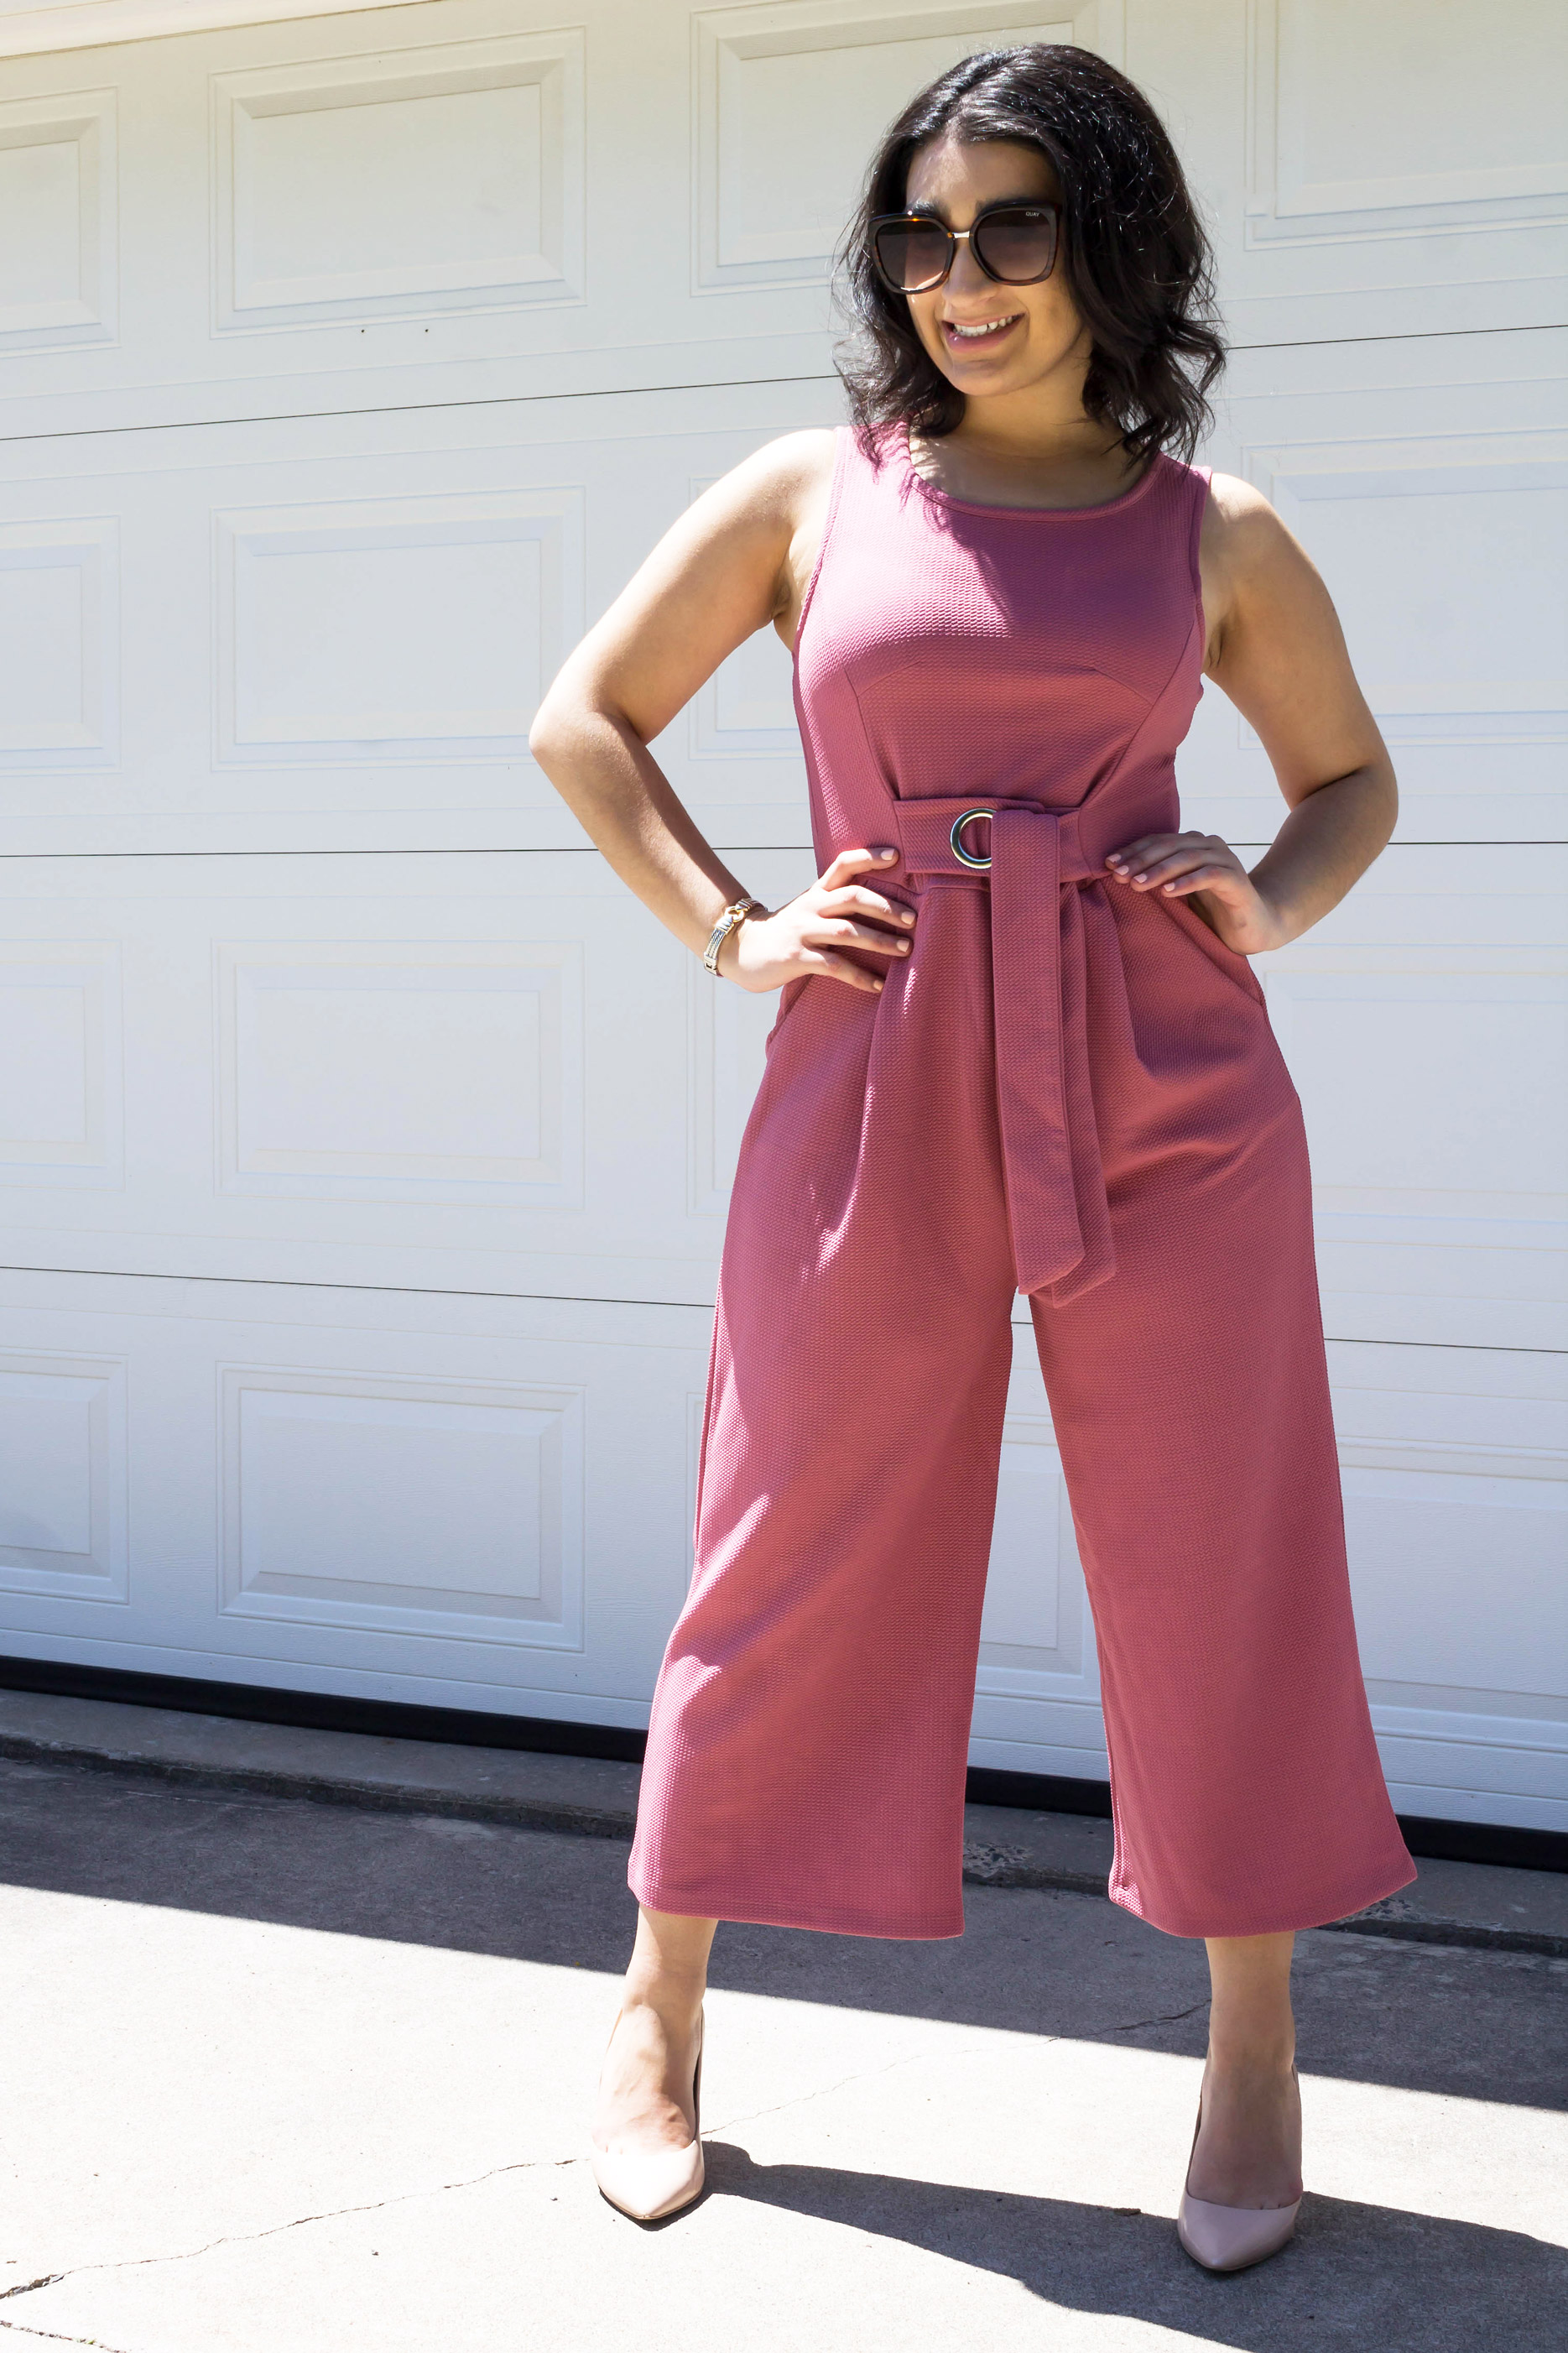 Why I Love Jumpsuits for Summer